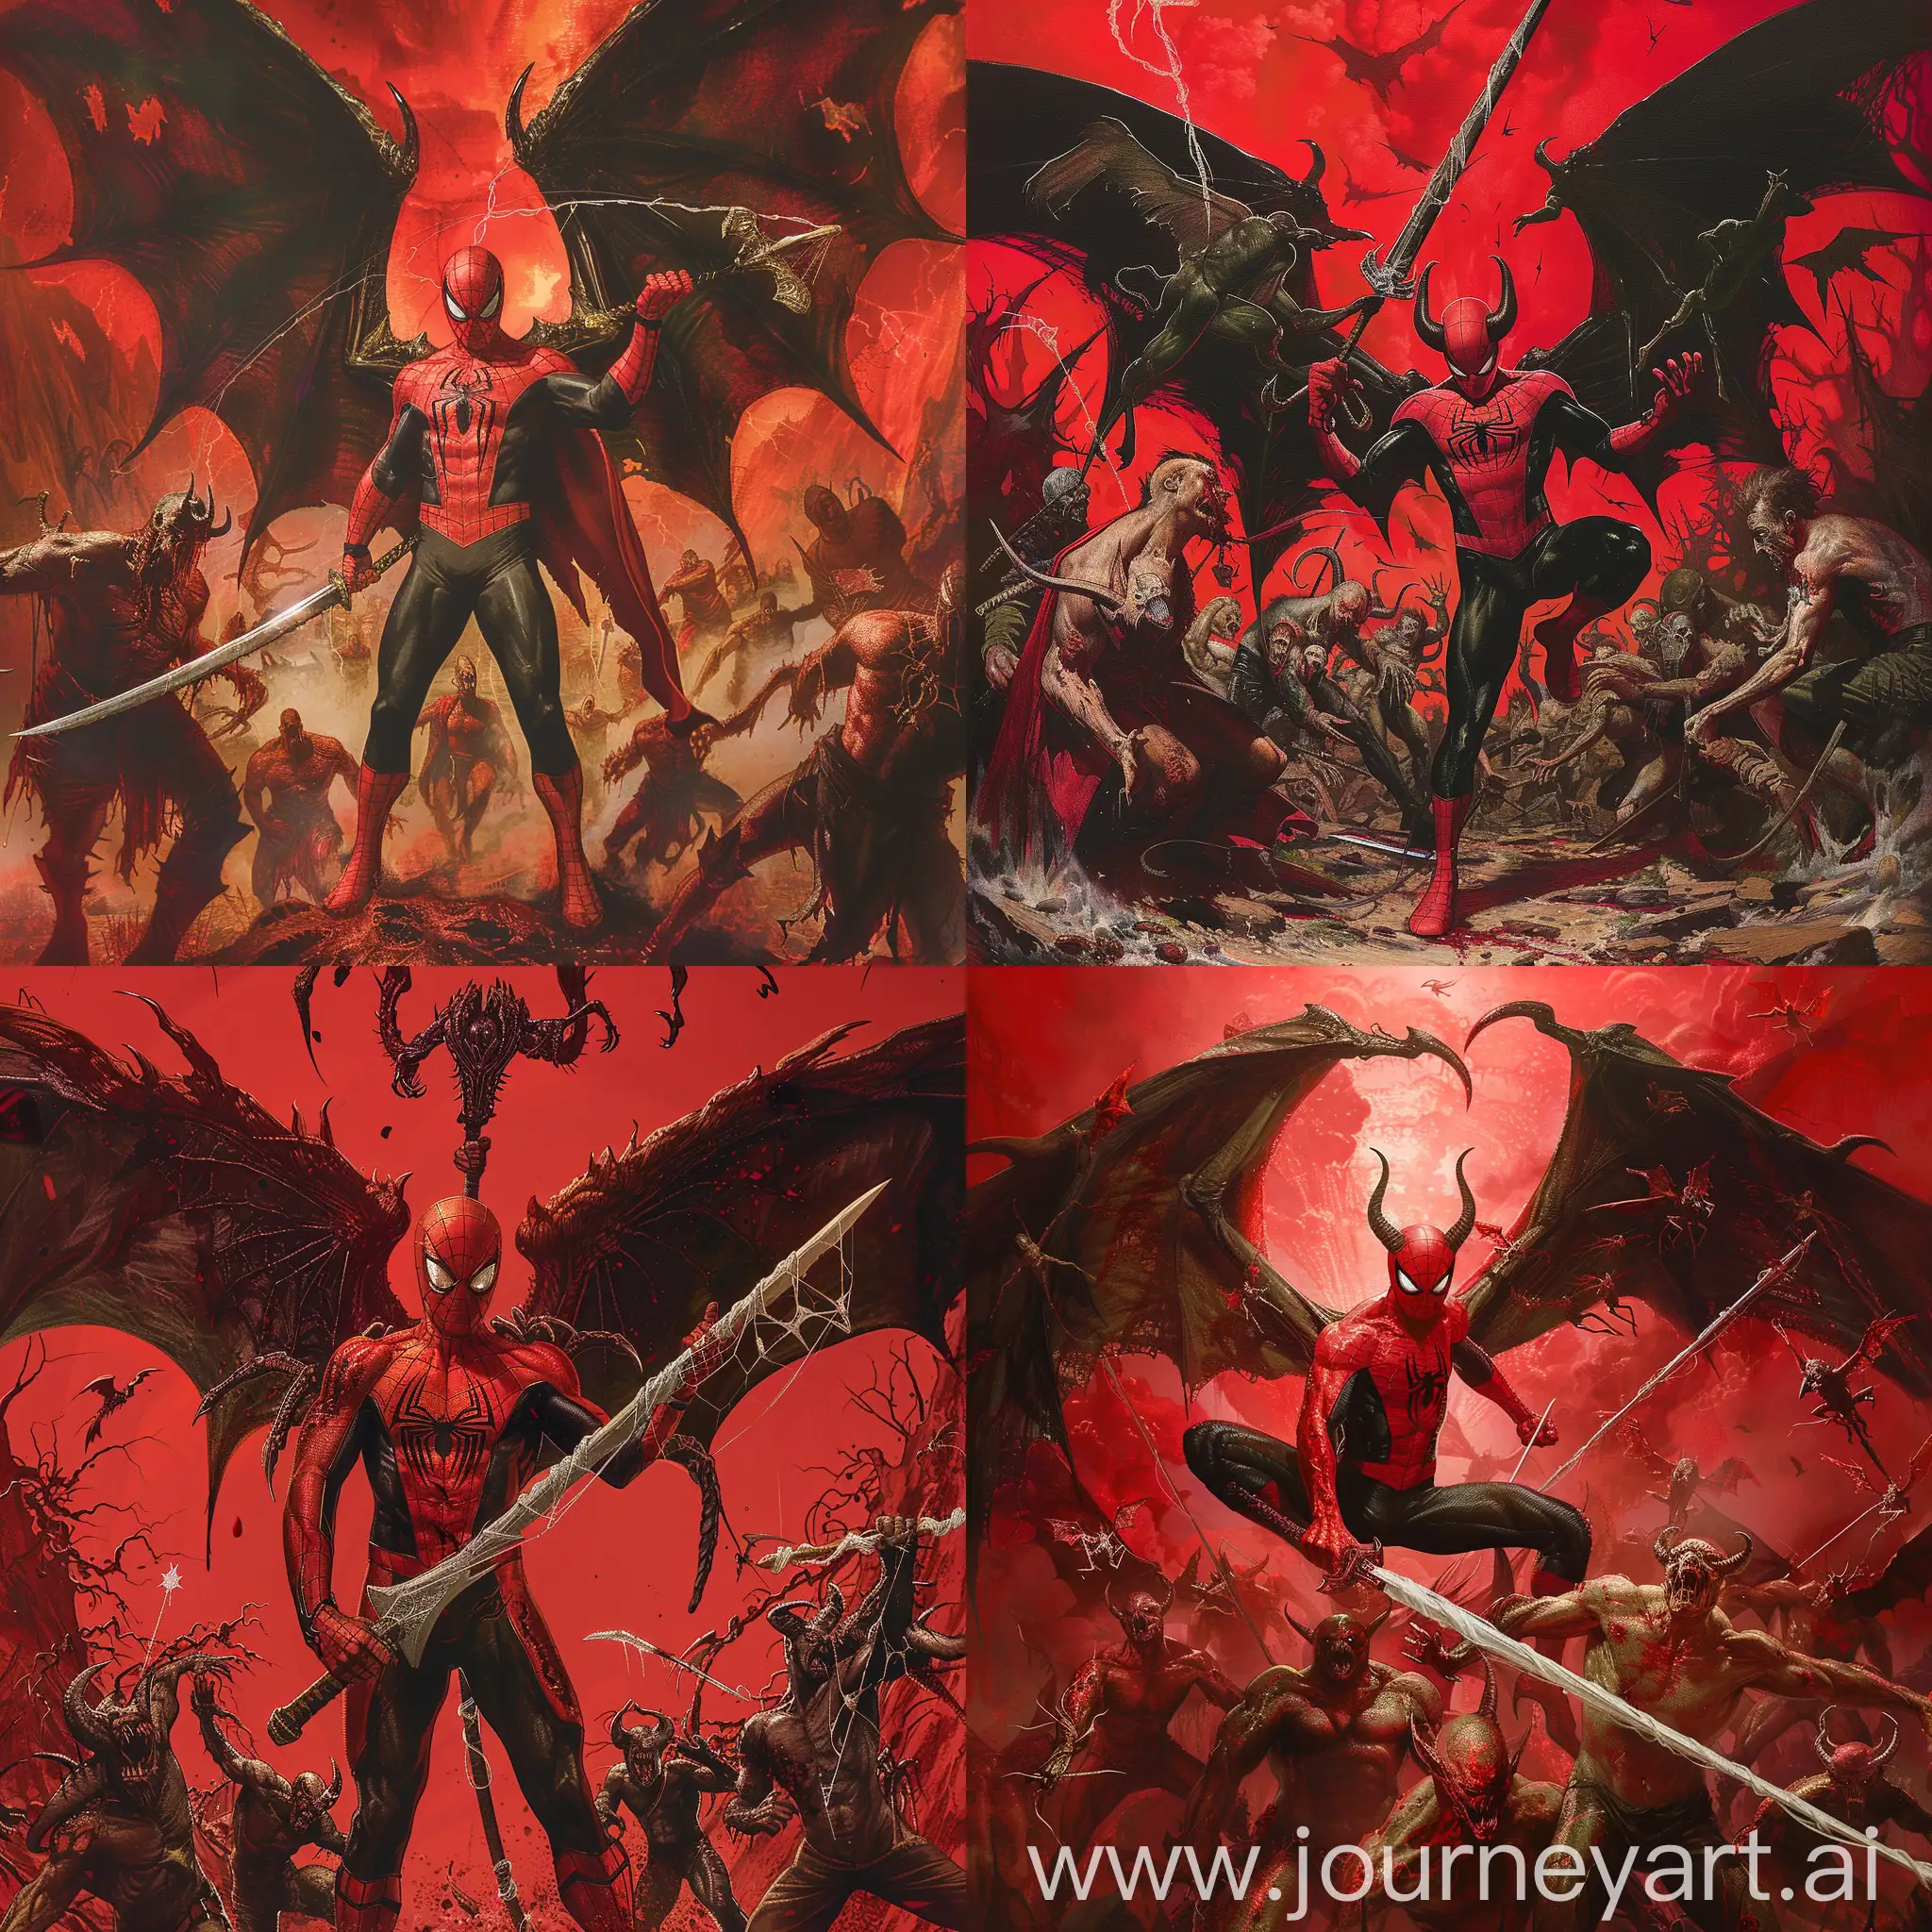 Evil Spiderman, with satanic wings, holding a diabolic-sword, leading an army of evil beings from hell, Inspired by Alex Ross and Tradd Moore, Red background, Exquisite detail, Natural light, animecore, realistic hyper-detailed portraits. High Resolution, fantasy style, horror, eerie, detailed scenery, soft brushwork